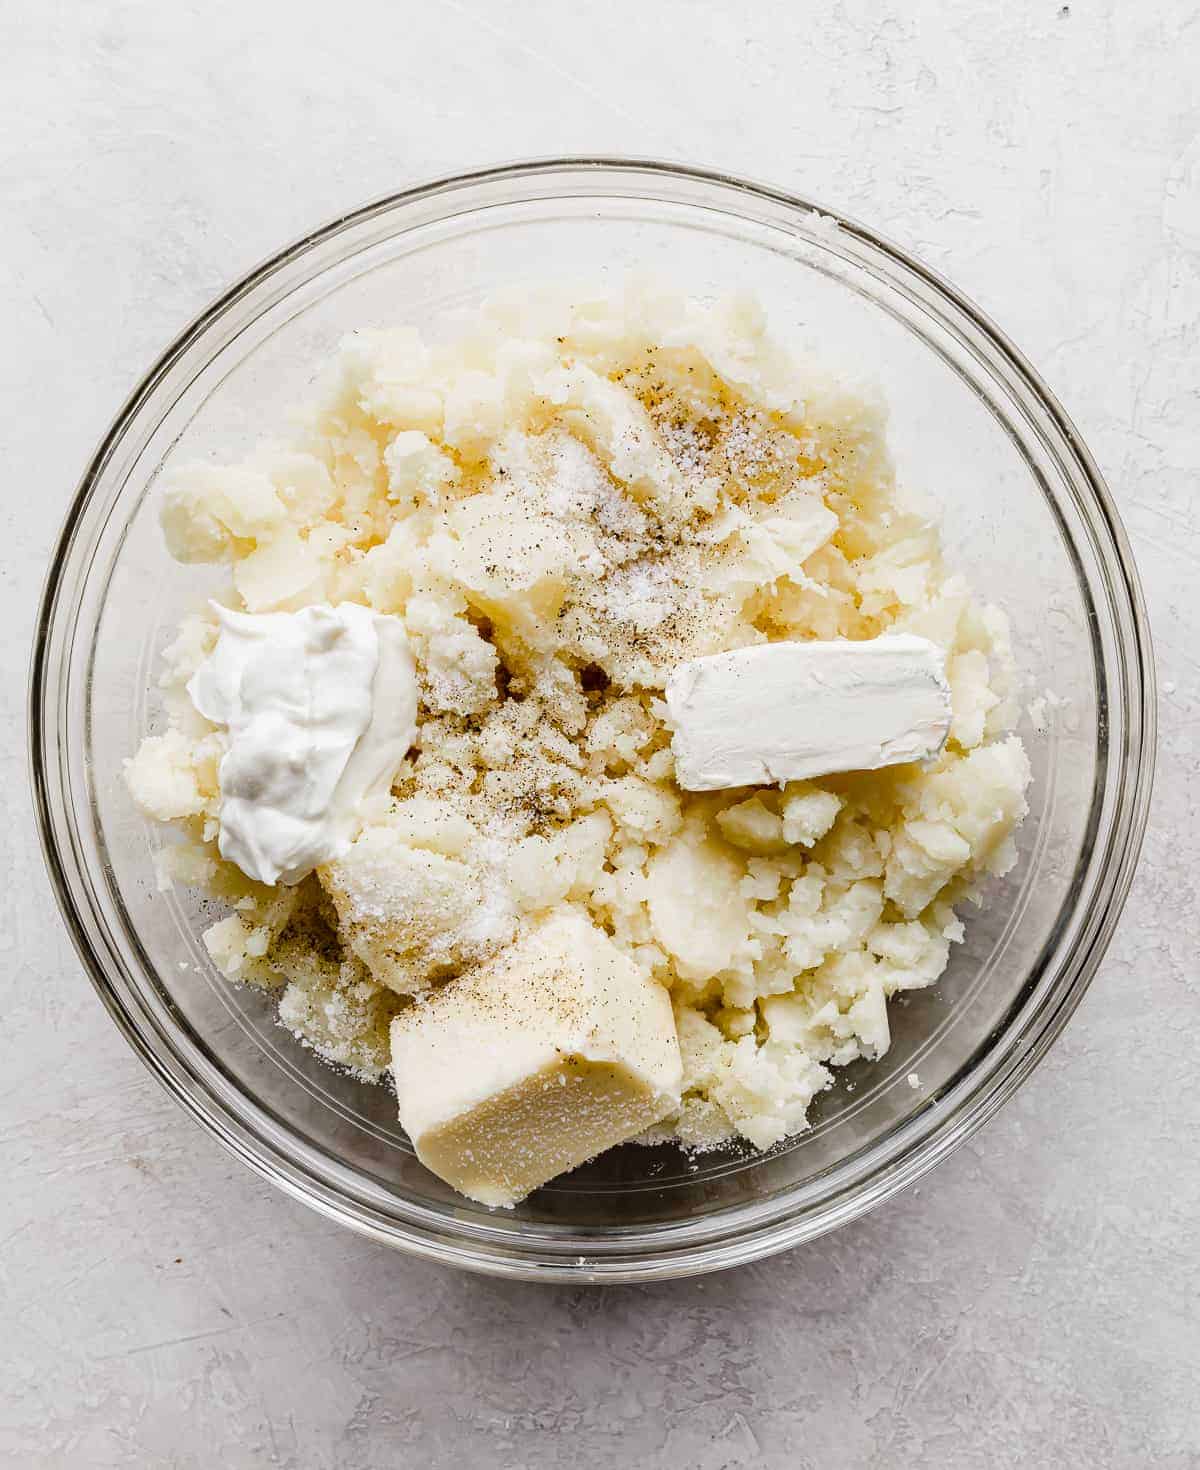 Potato pulp in a bowl with butter, cream cheese, and sour cream.